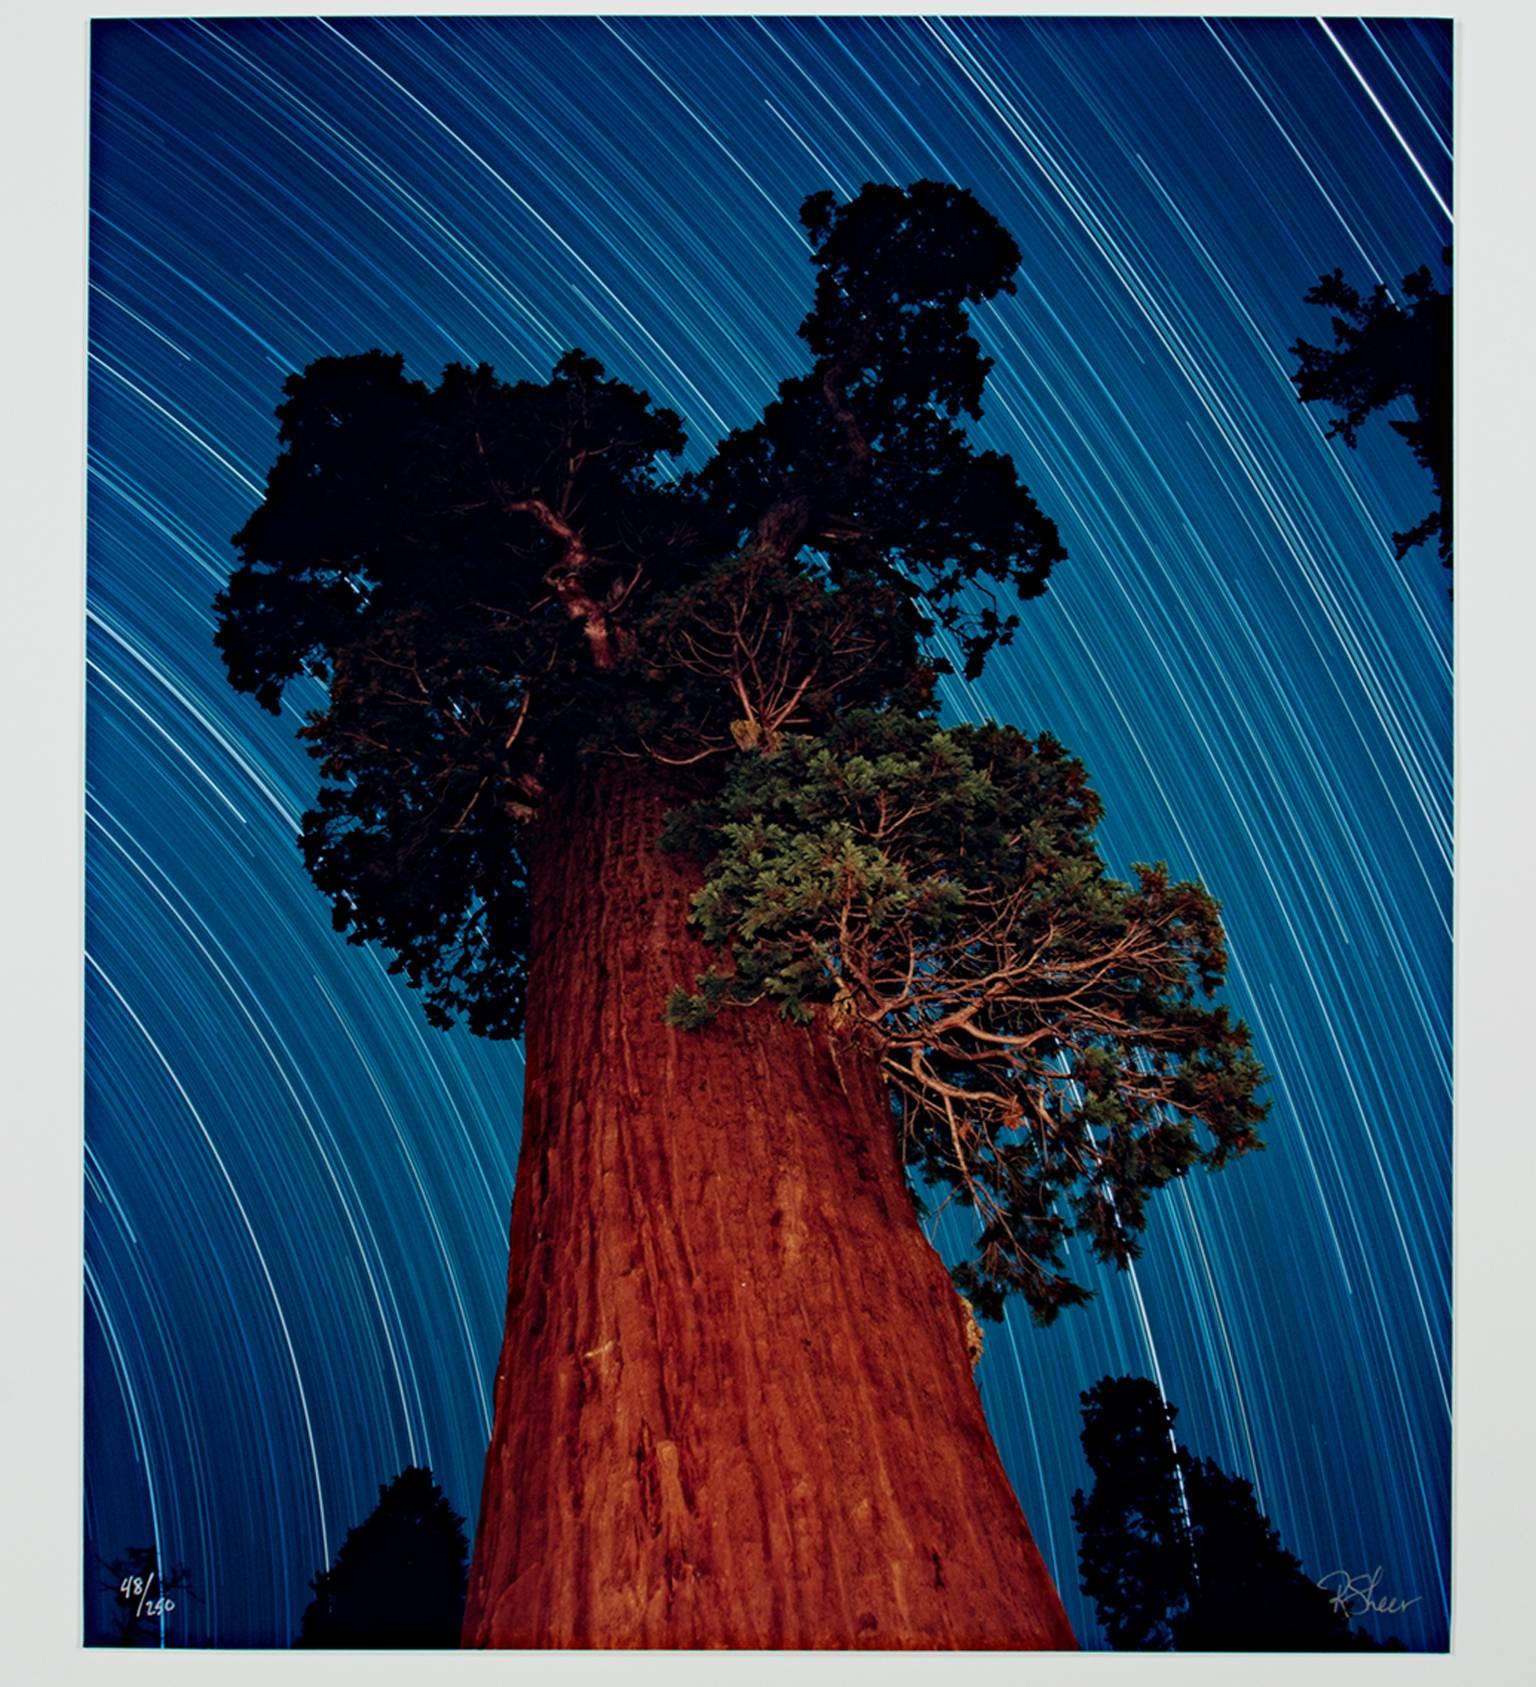 "Giant Sequoia Star Trail," a Photograph signed by Robert Kawika Sheer